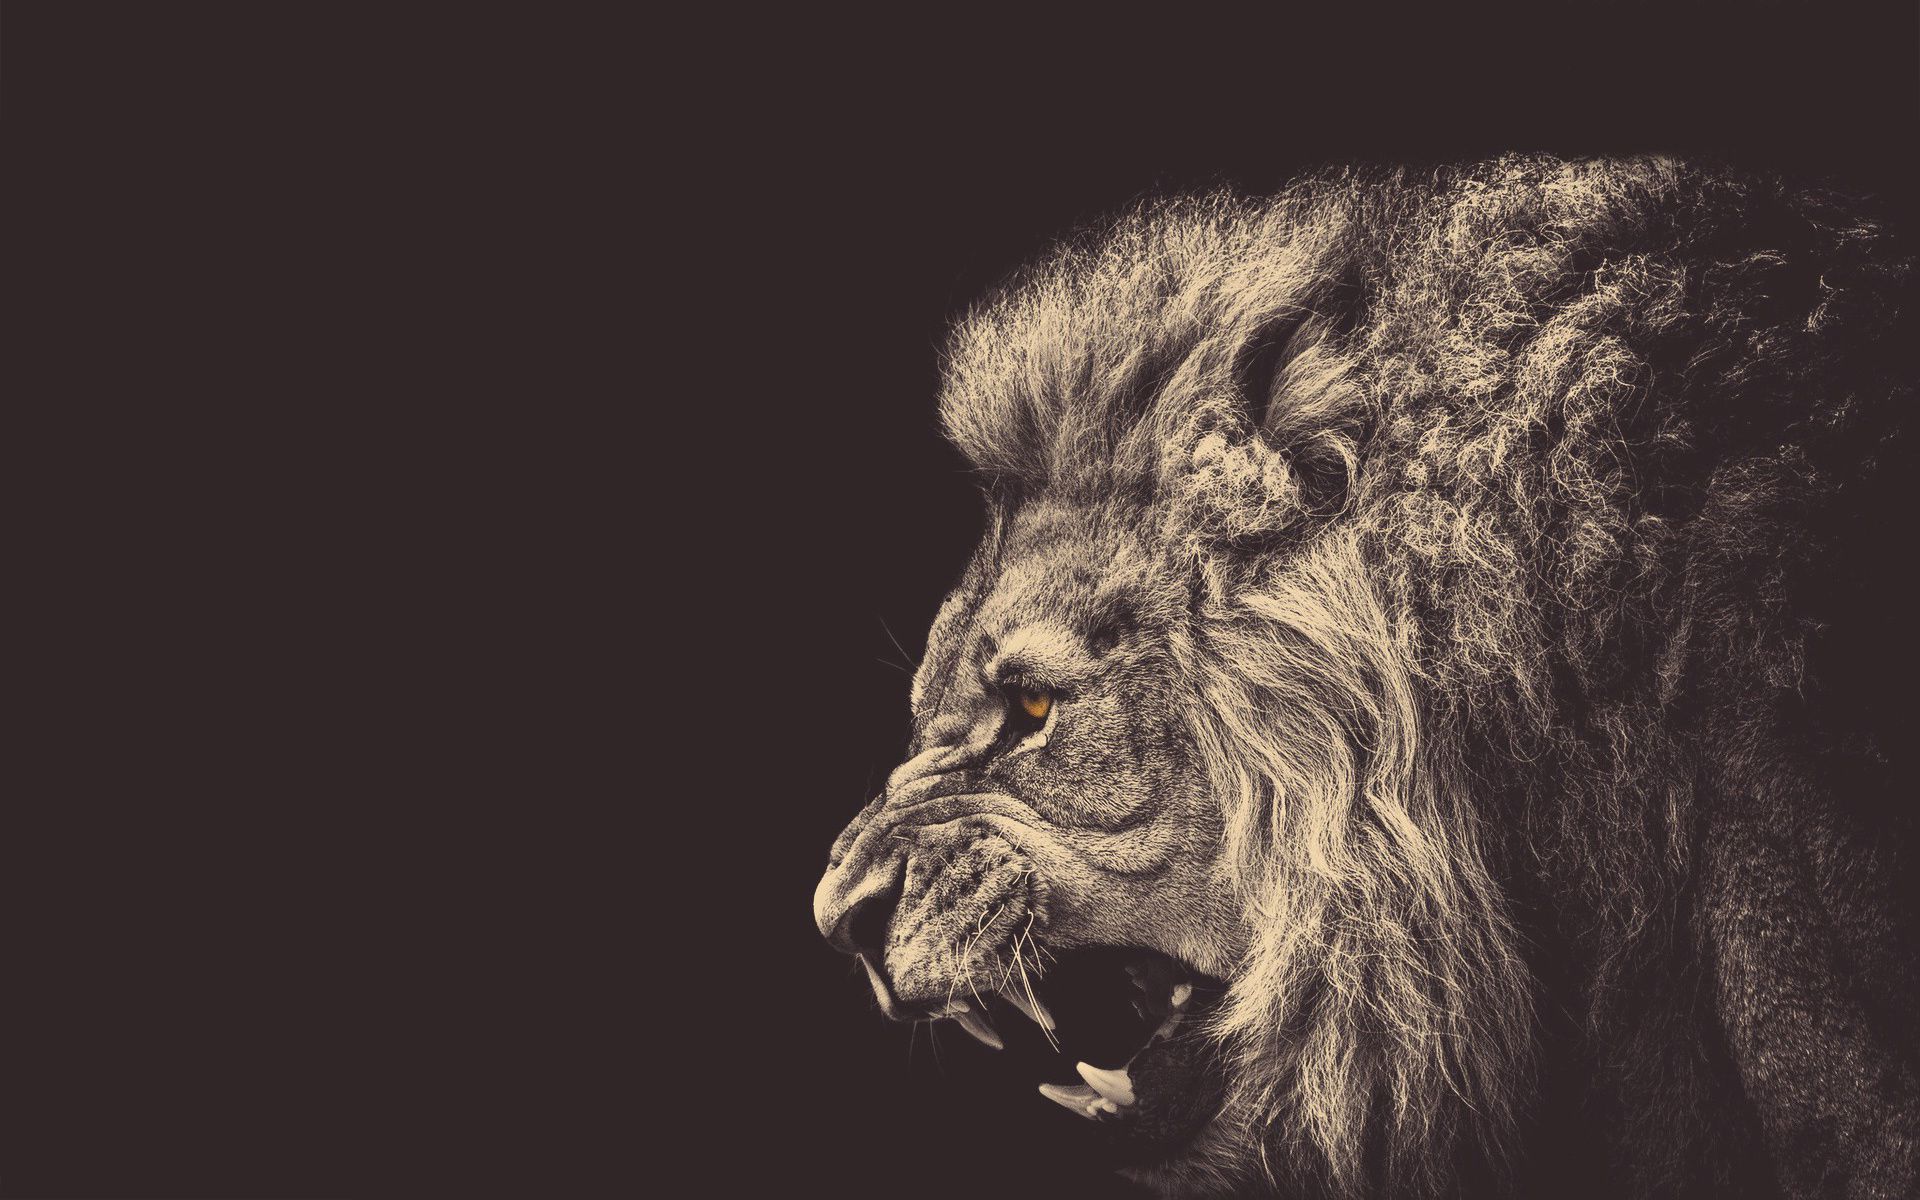 IMAGE angry lions wallpaper